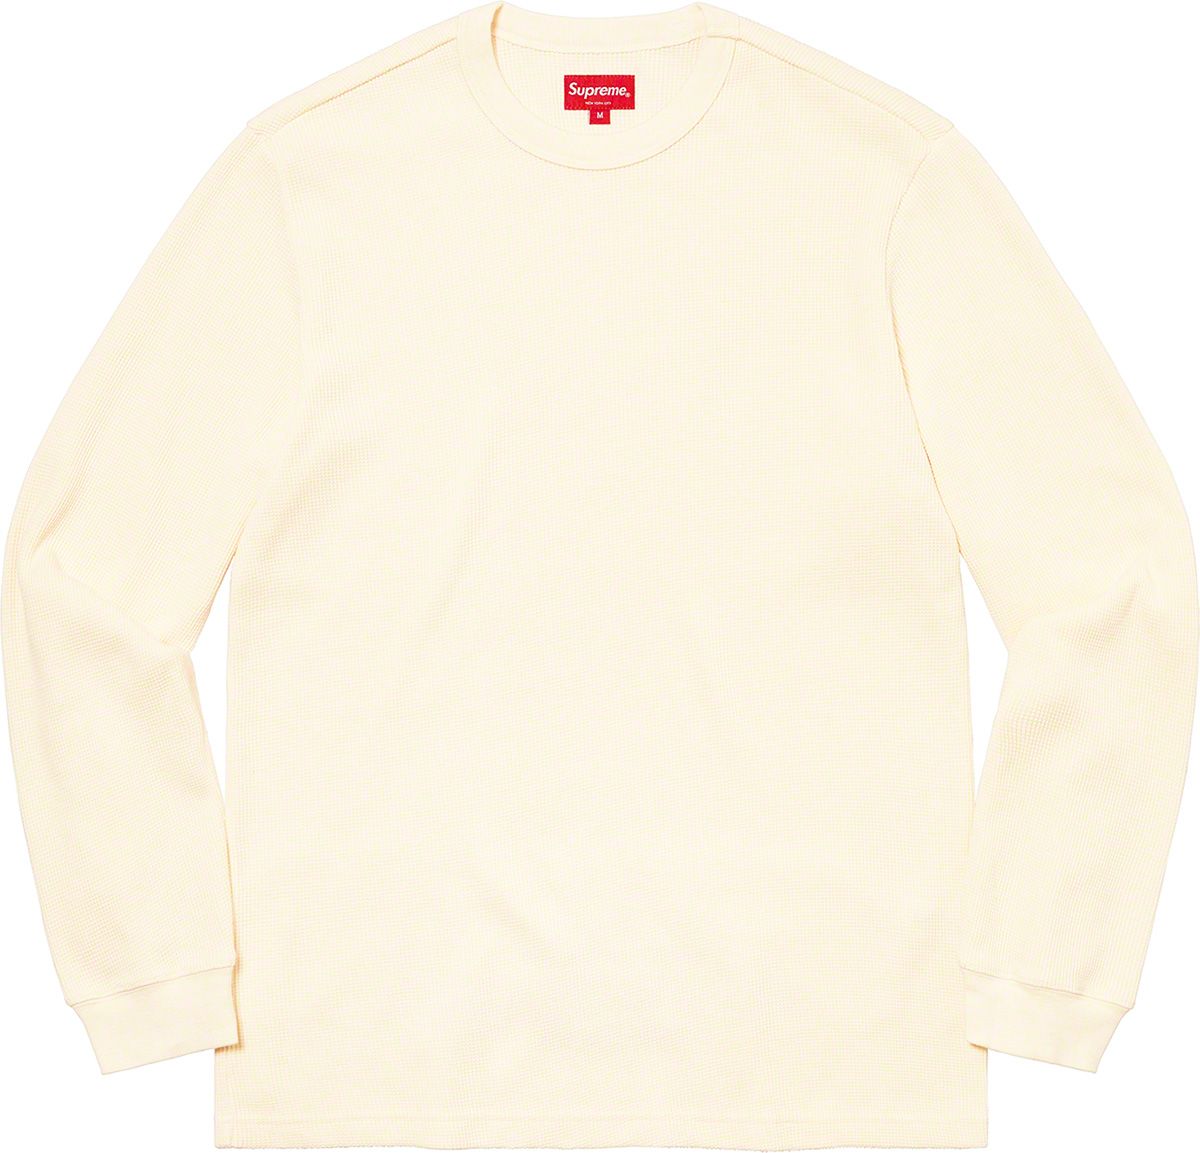 East West S/S Top - Fall/Winter 2021 Preview – Supreme